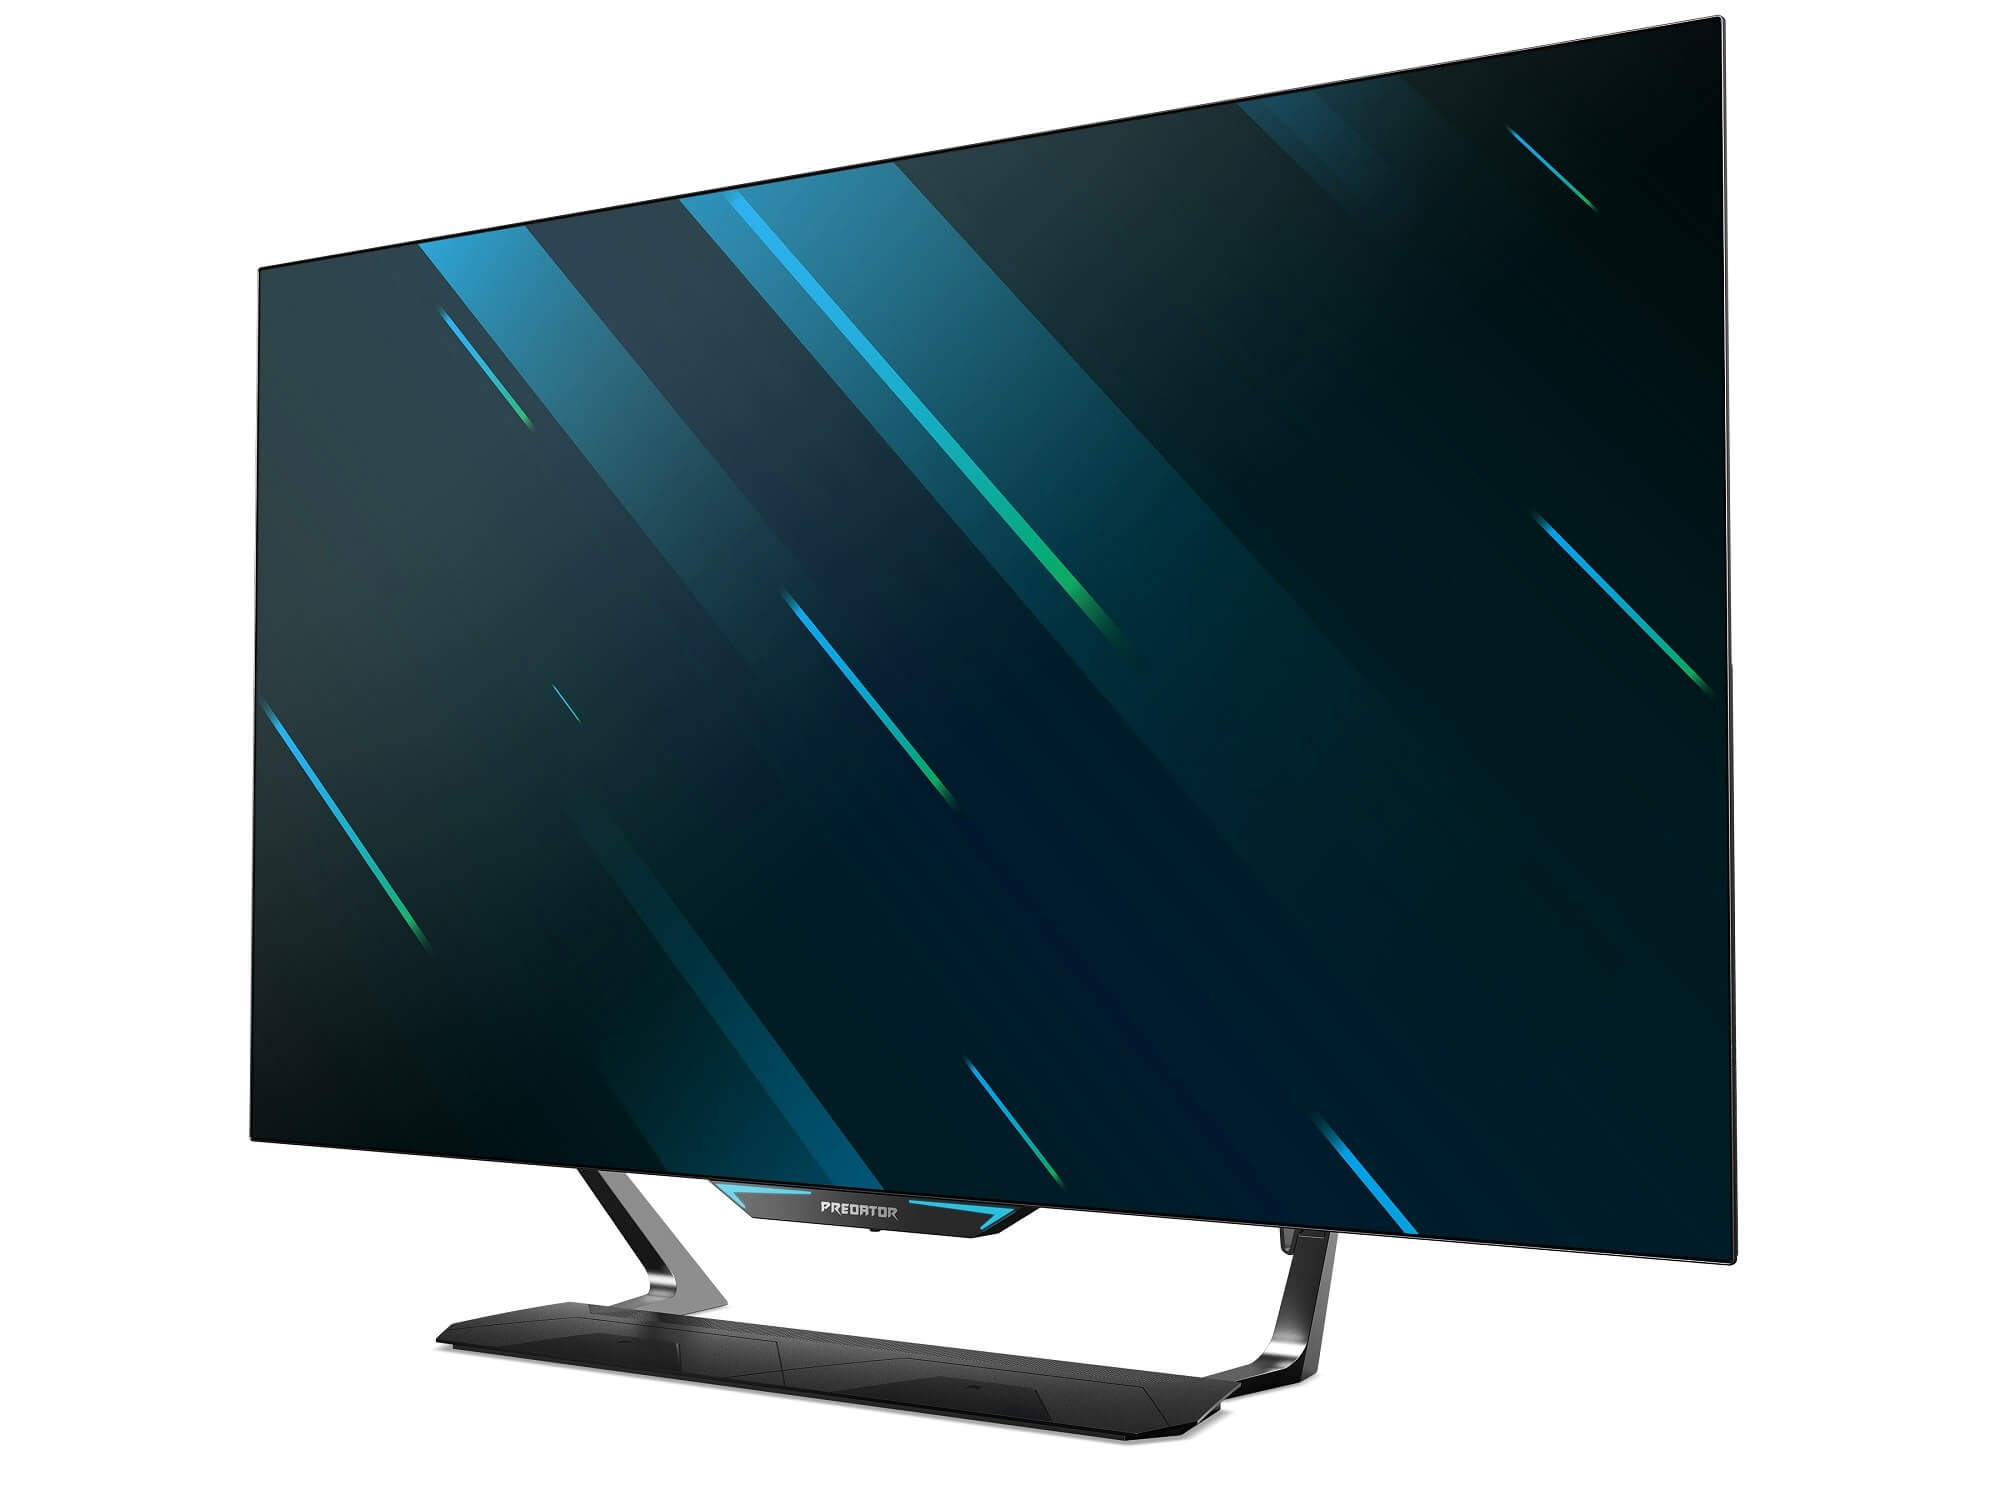 Acer unveils 55-inch OLED Predator monitor, also the Predator X32 and X38 gaming displays